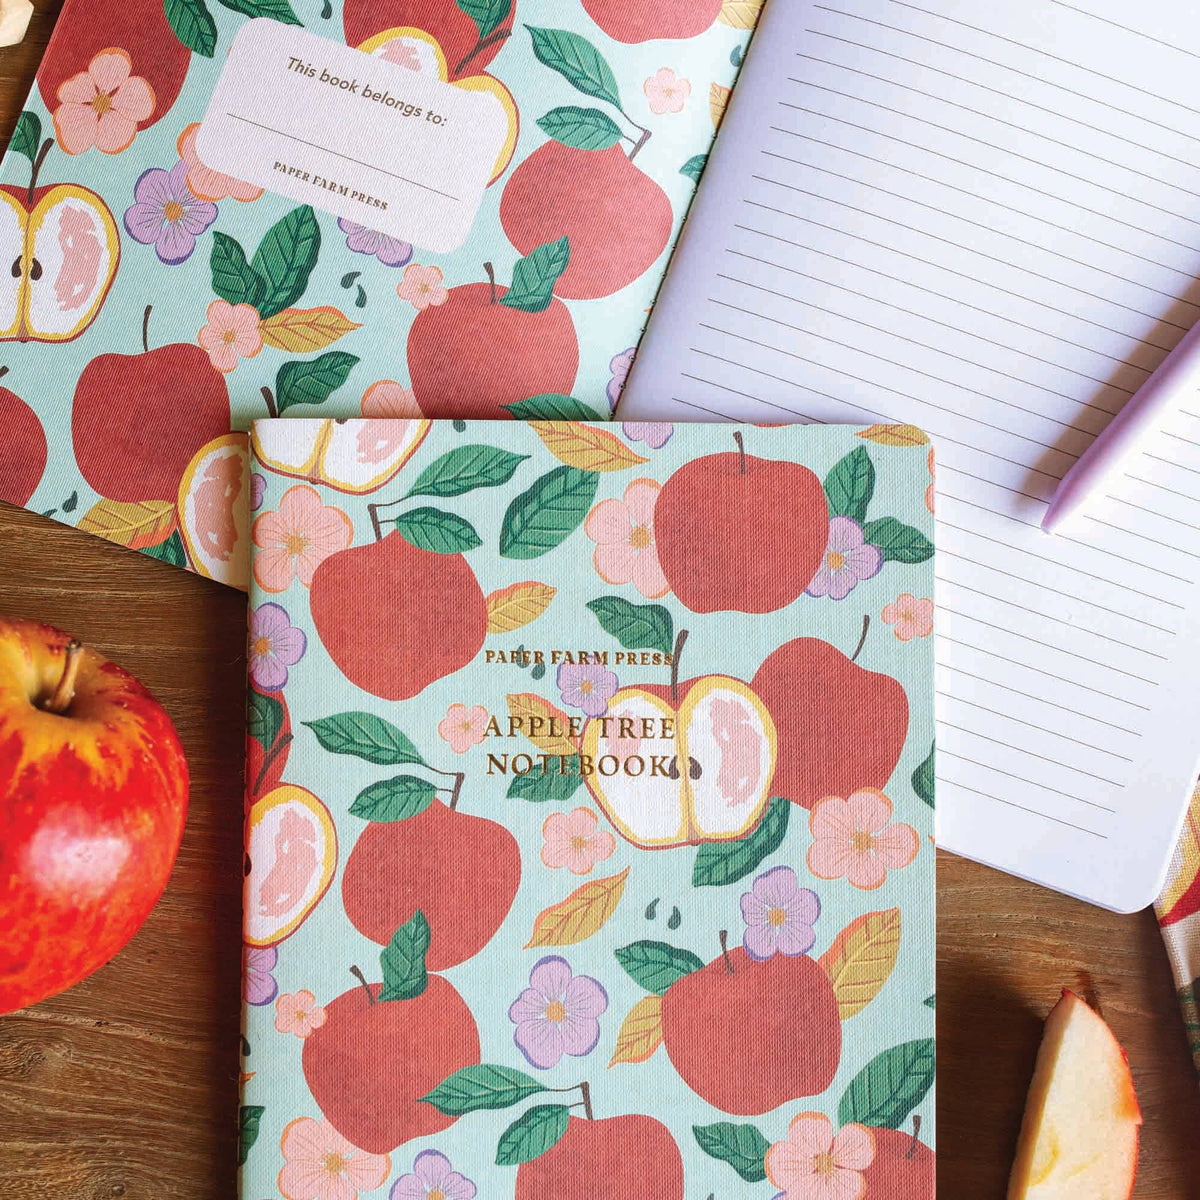 What you Water Grows Apple Tree  Stitched Notebook